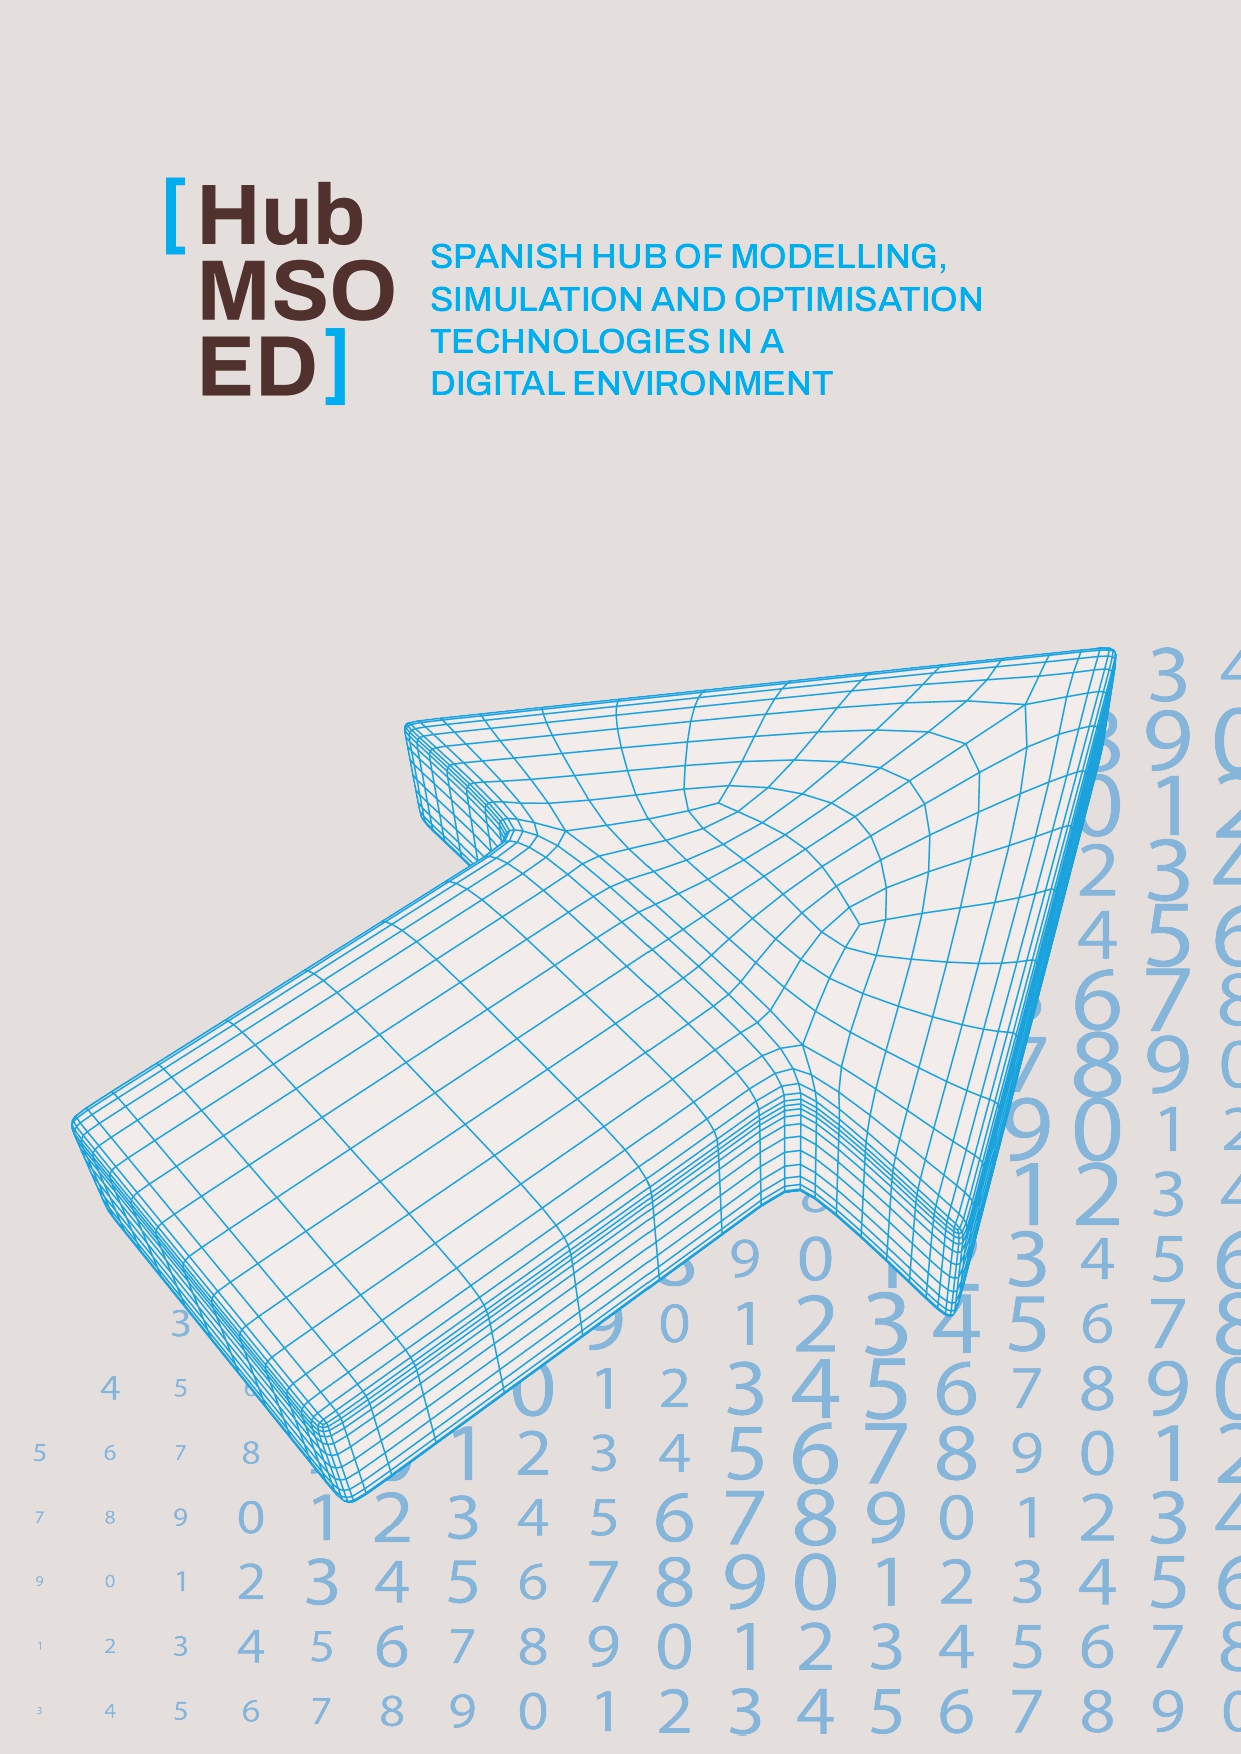 The Spanish Platform for Modelling, Simulation and Optimisation Technologies in a Digital Environment (PET MSO-ED), has now available the services of its MSO-ED Hub through its website.